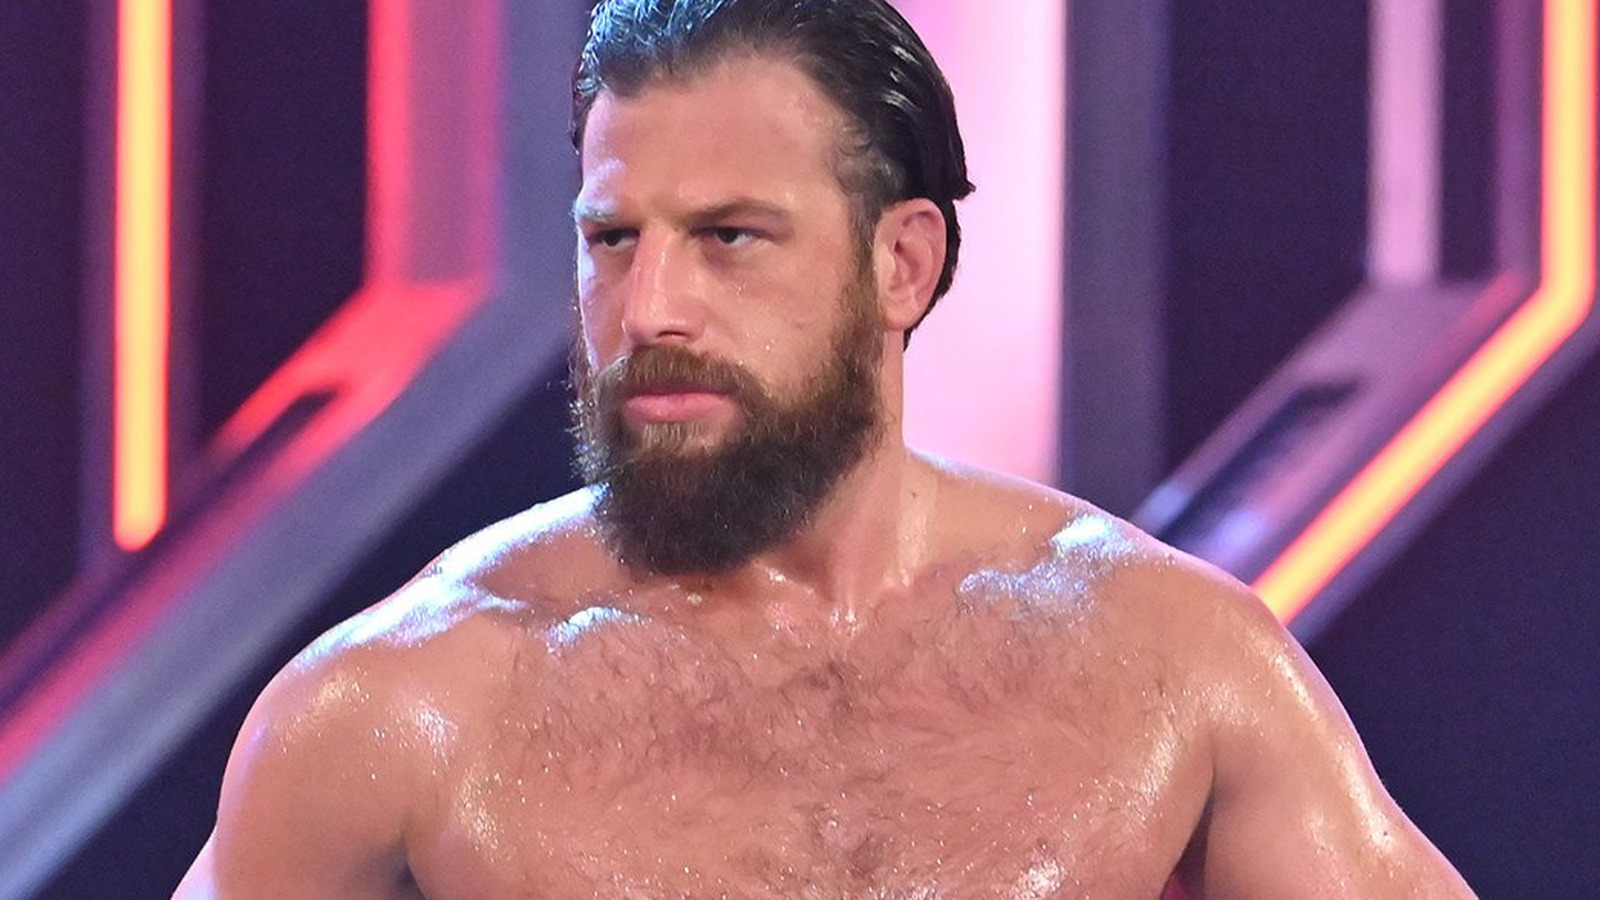 WWE Releases Drew Gulak, Nine Other NXT Performers In Latest Round Of Mass Cuts